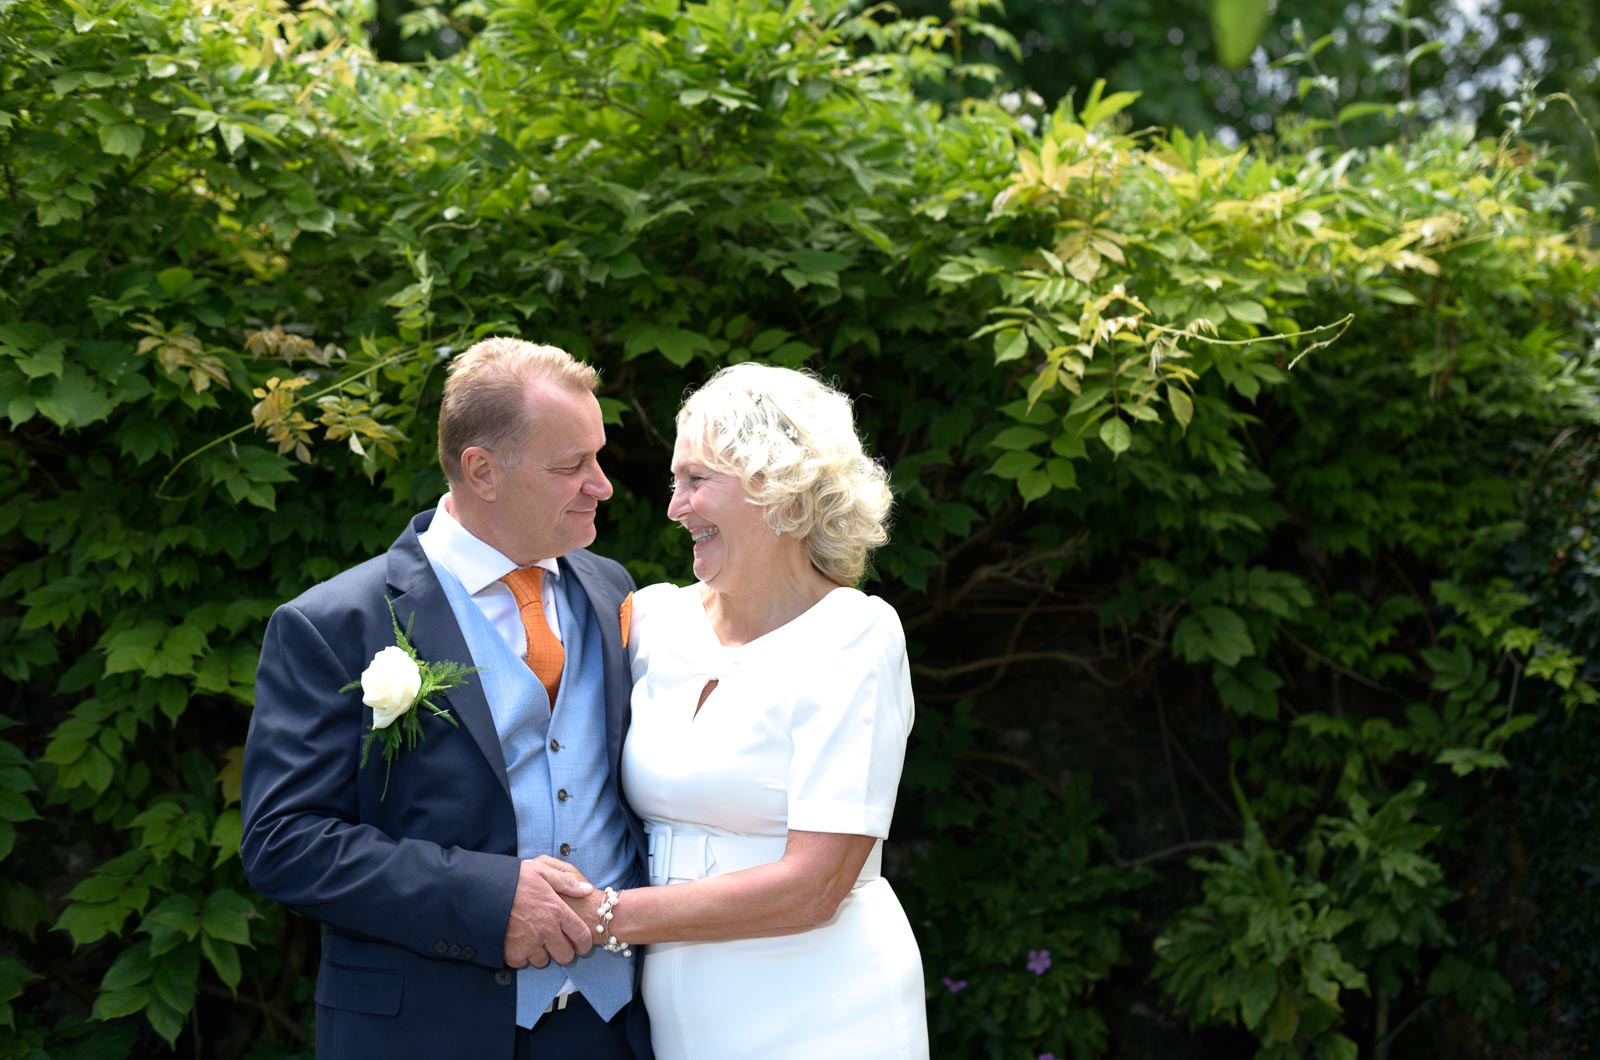 Wedding Photographer for Martin and Joanne at Lewes Registry Office